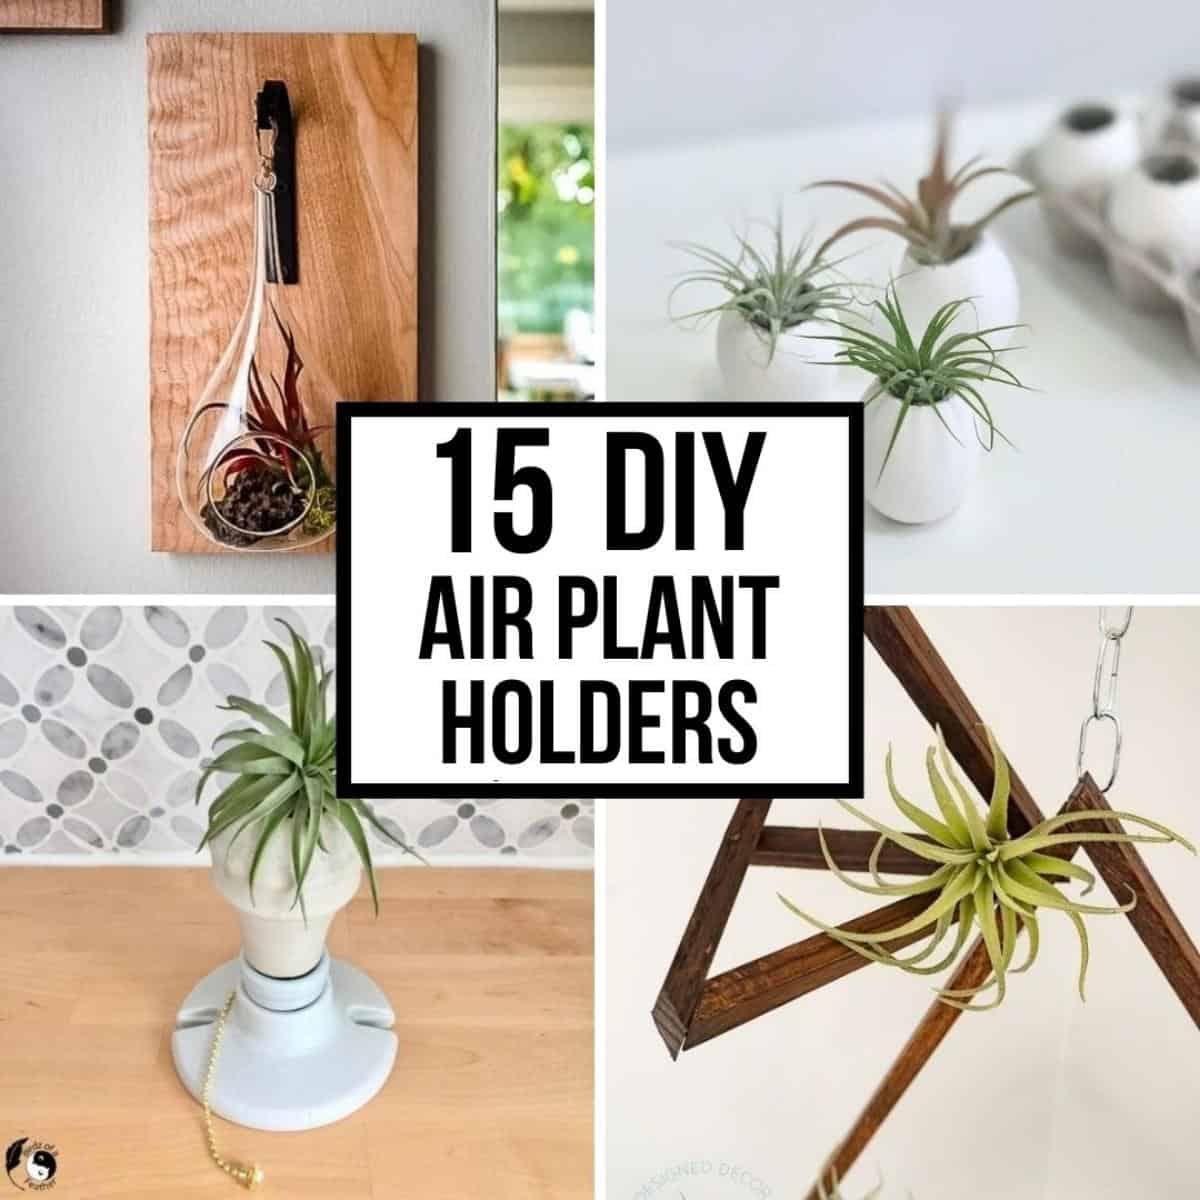 DIY - Plastic Plant Tray Holder, Save your FLATS 